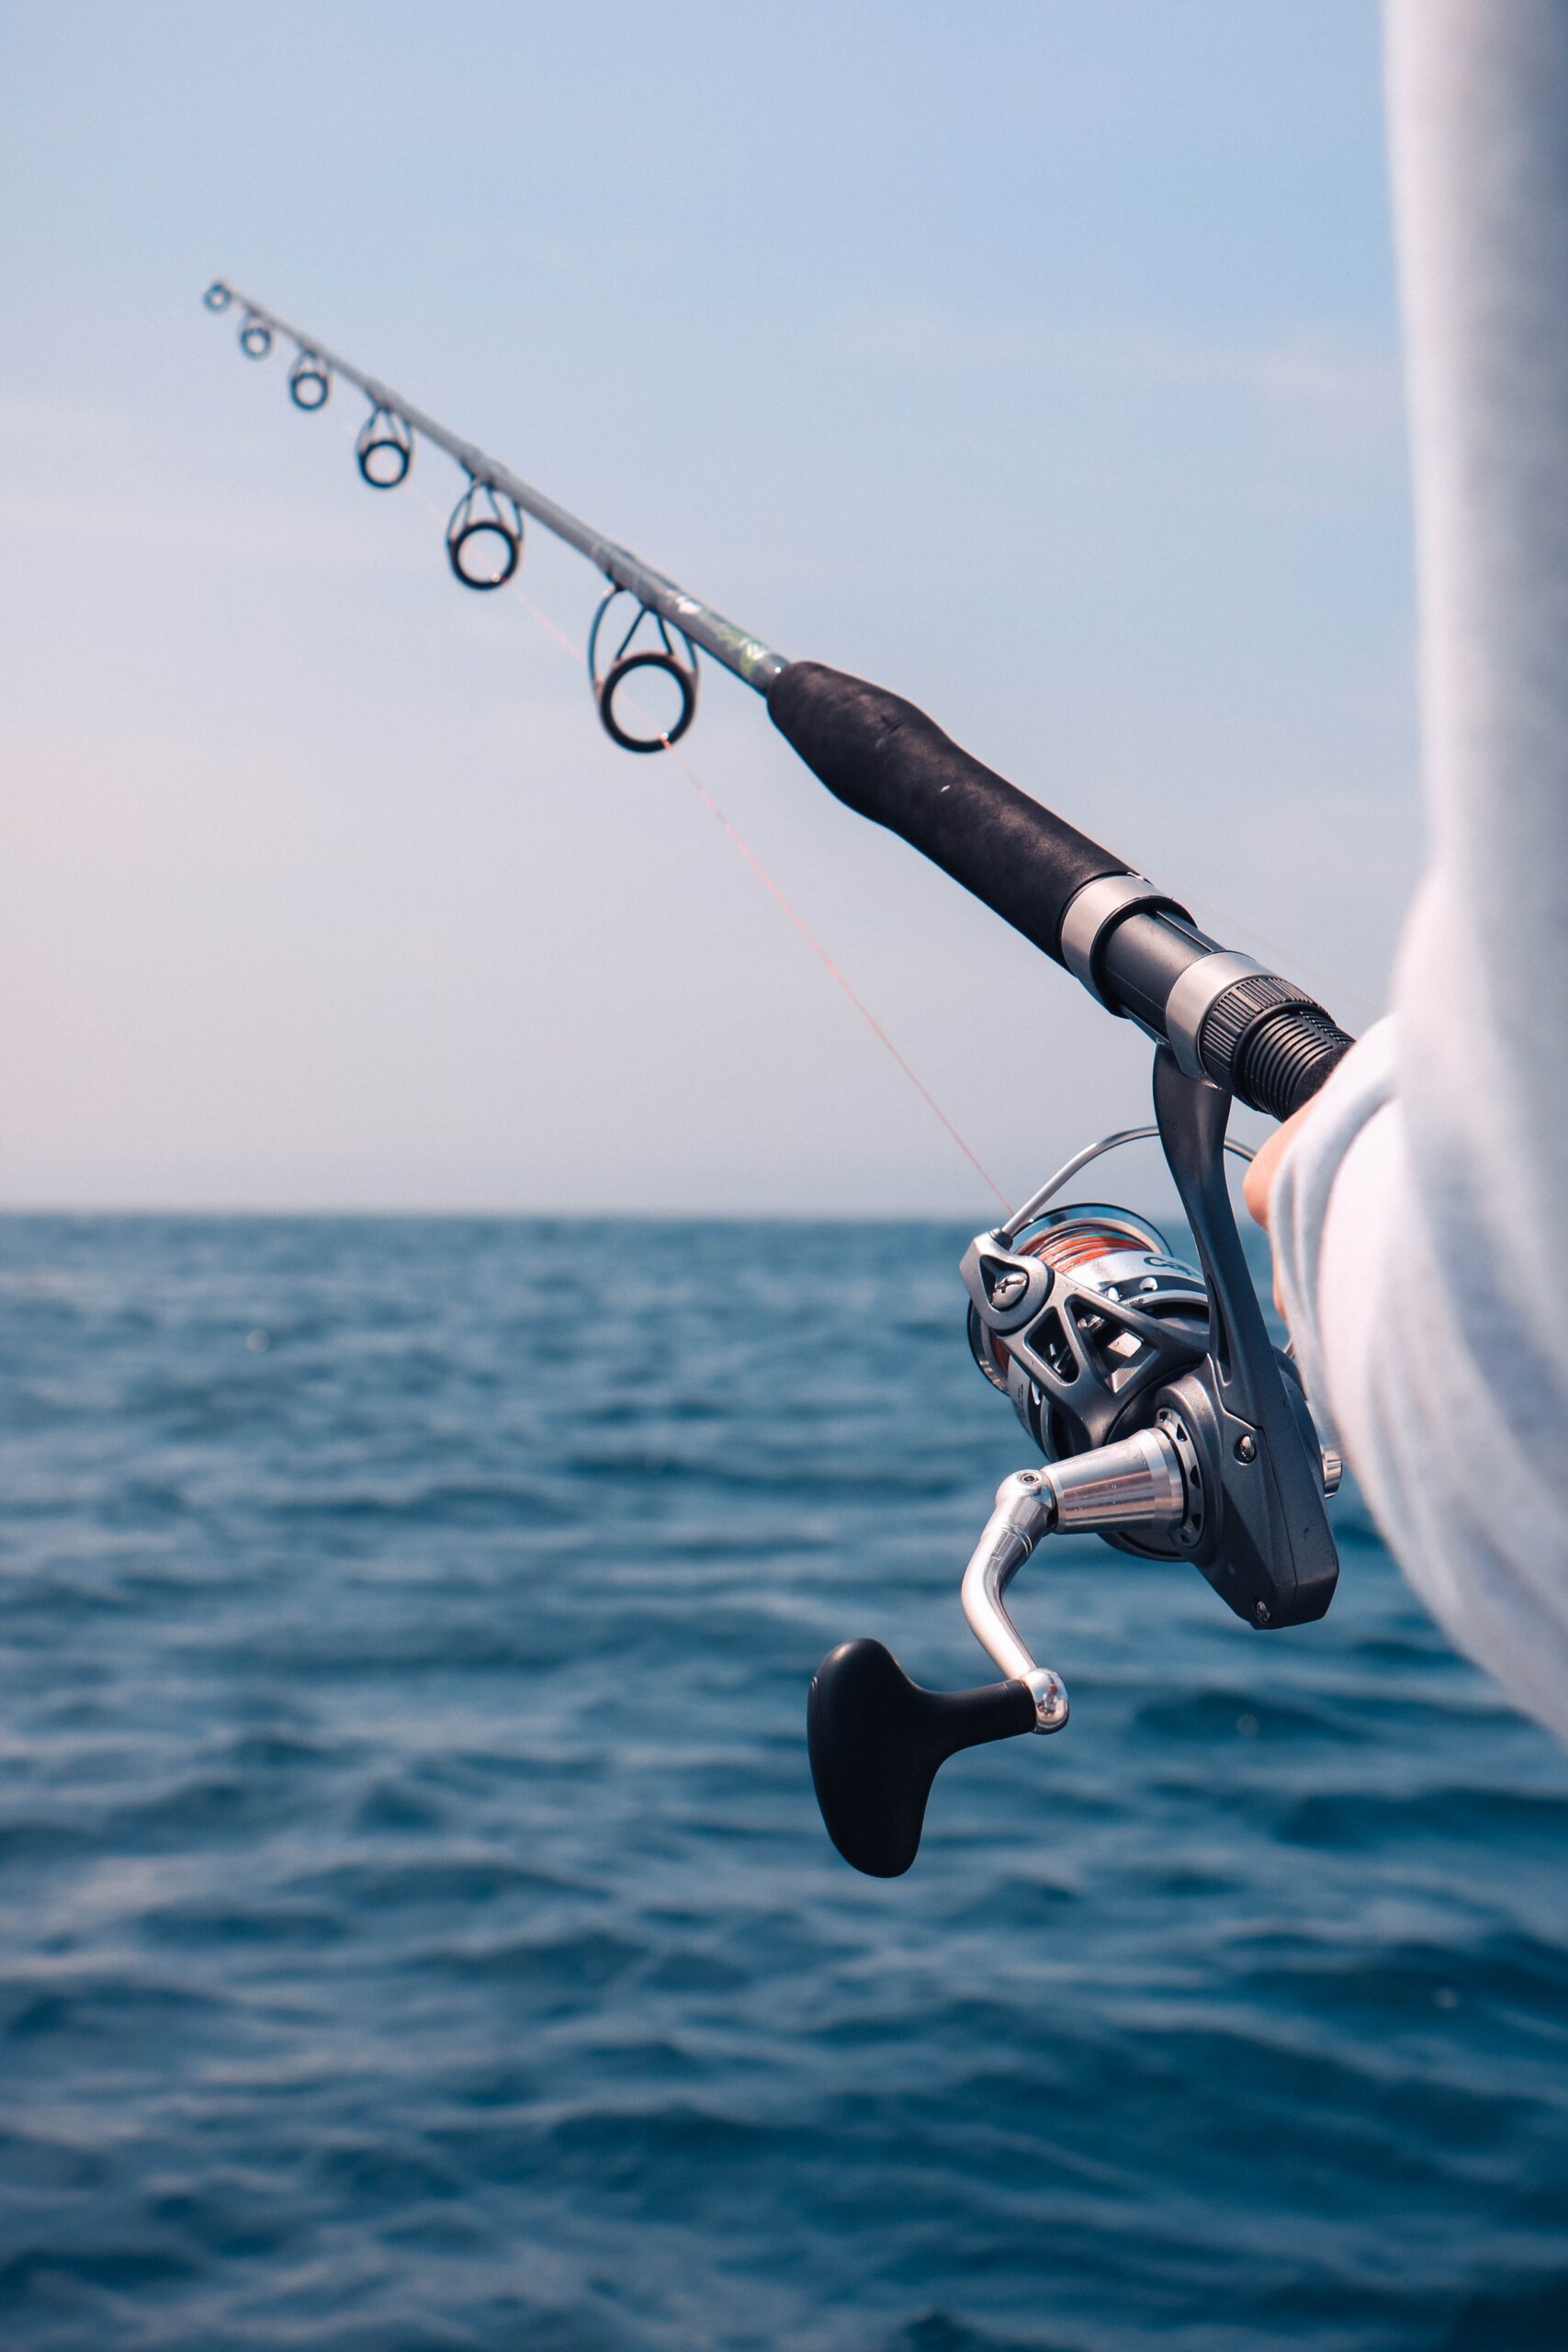 The Best Times To Fish In Freshwater: Seasonal And Daily Timing Tips